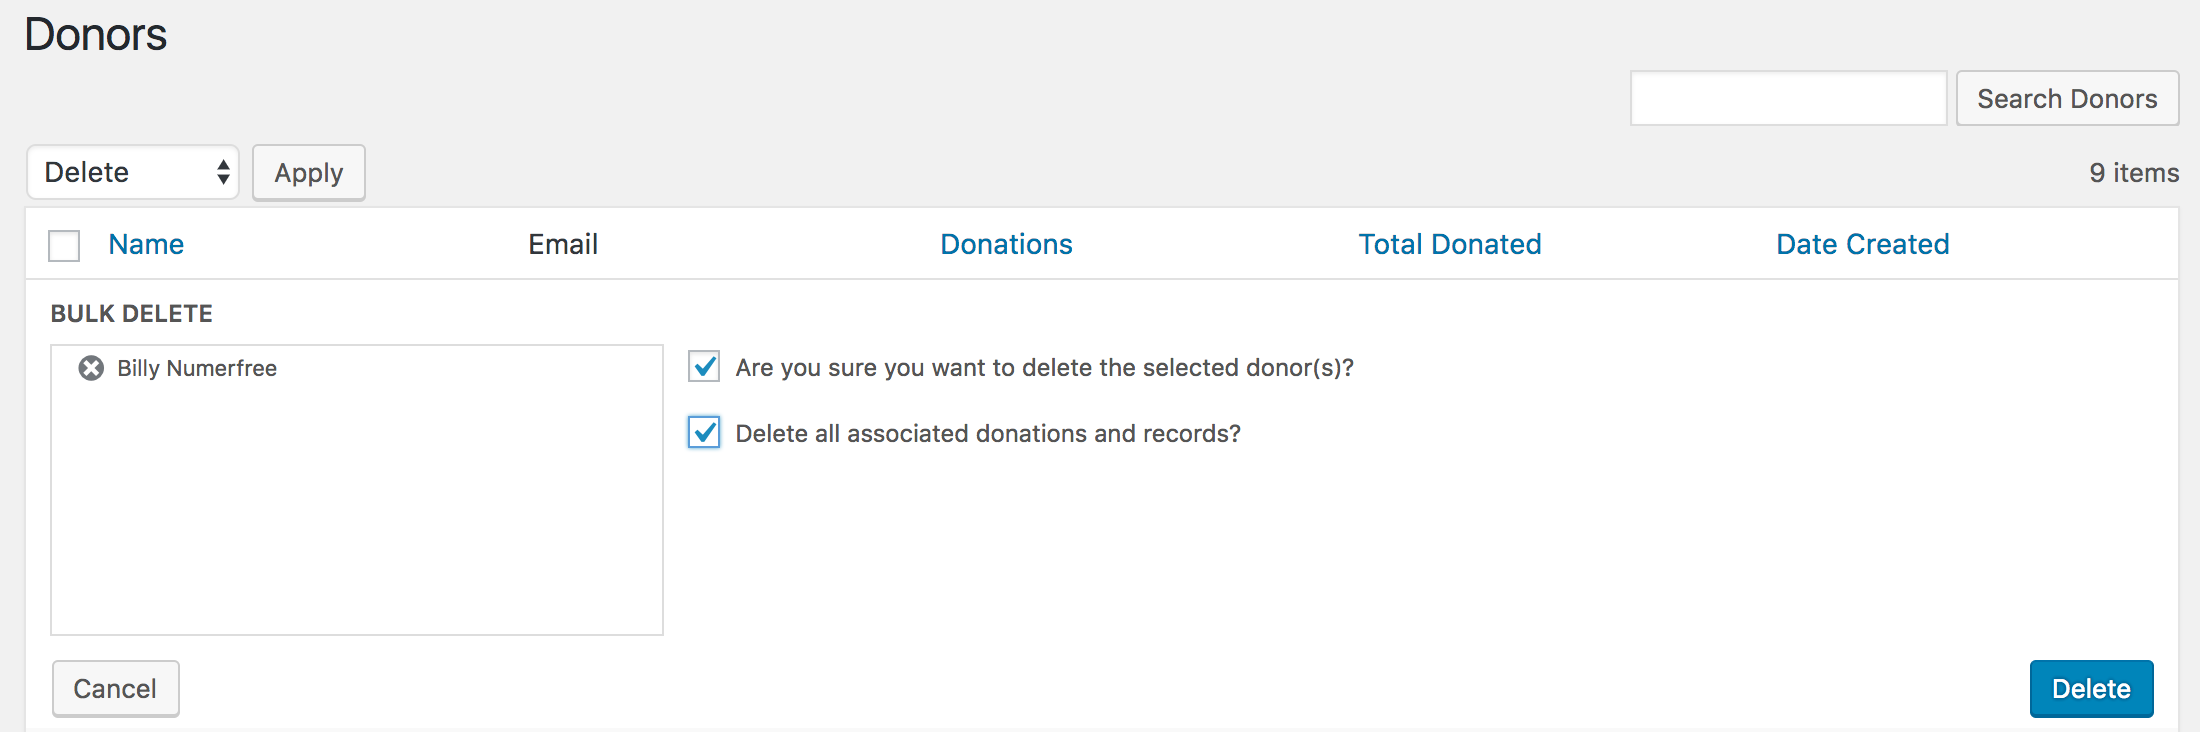 screenshot of the main Donors page with bulk delete options available.